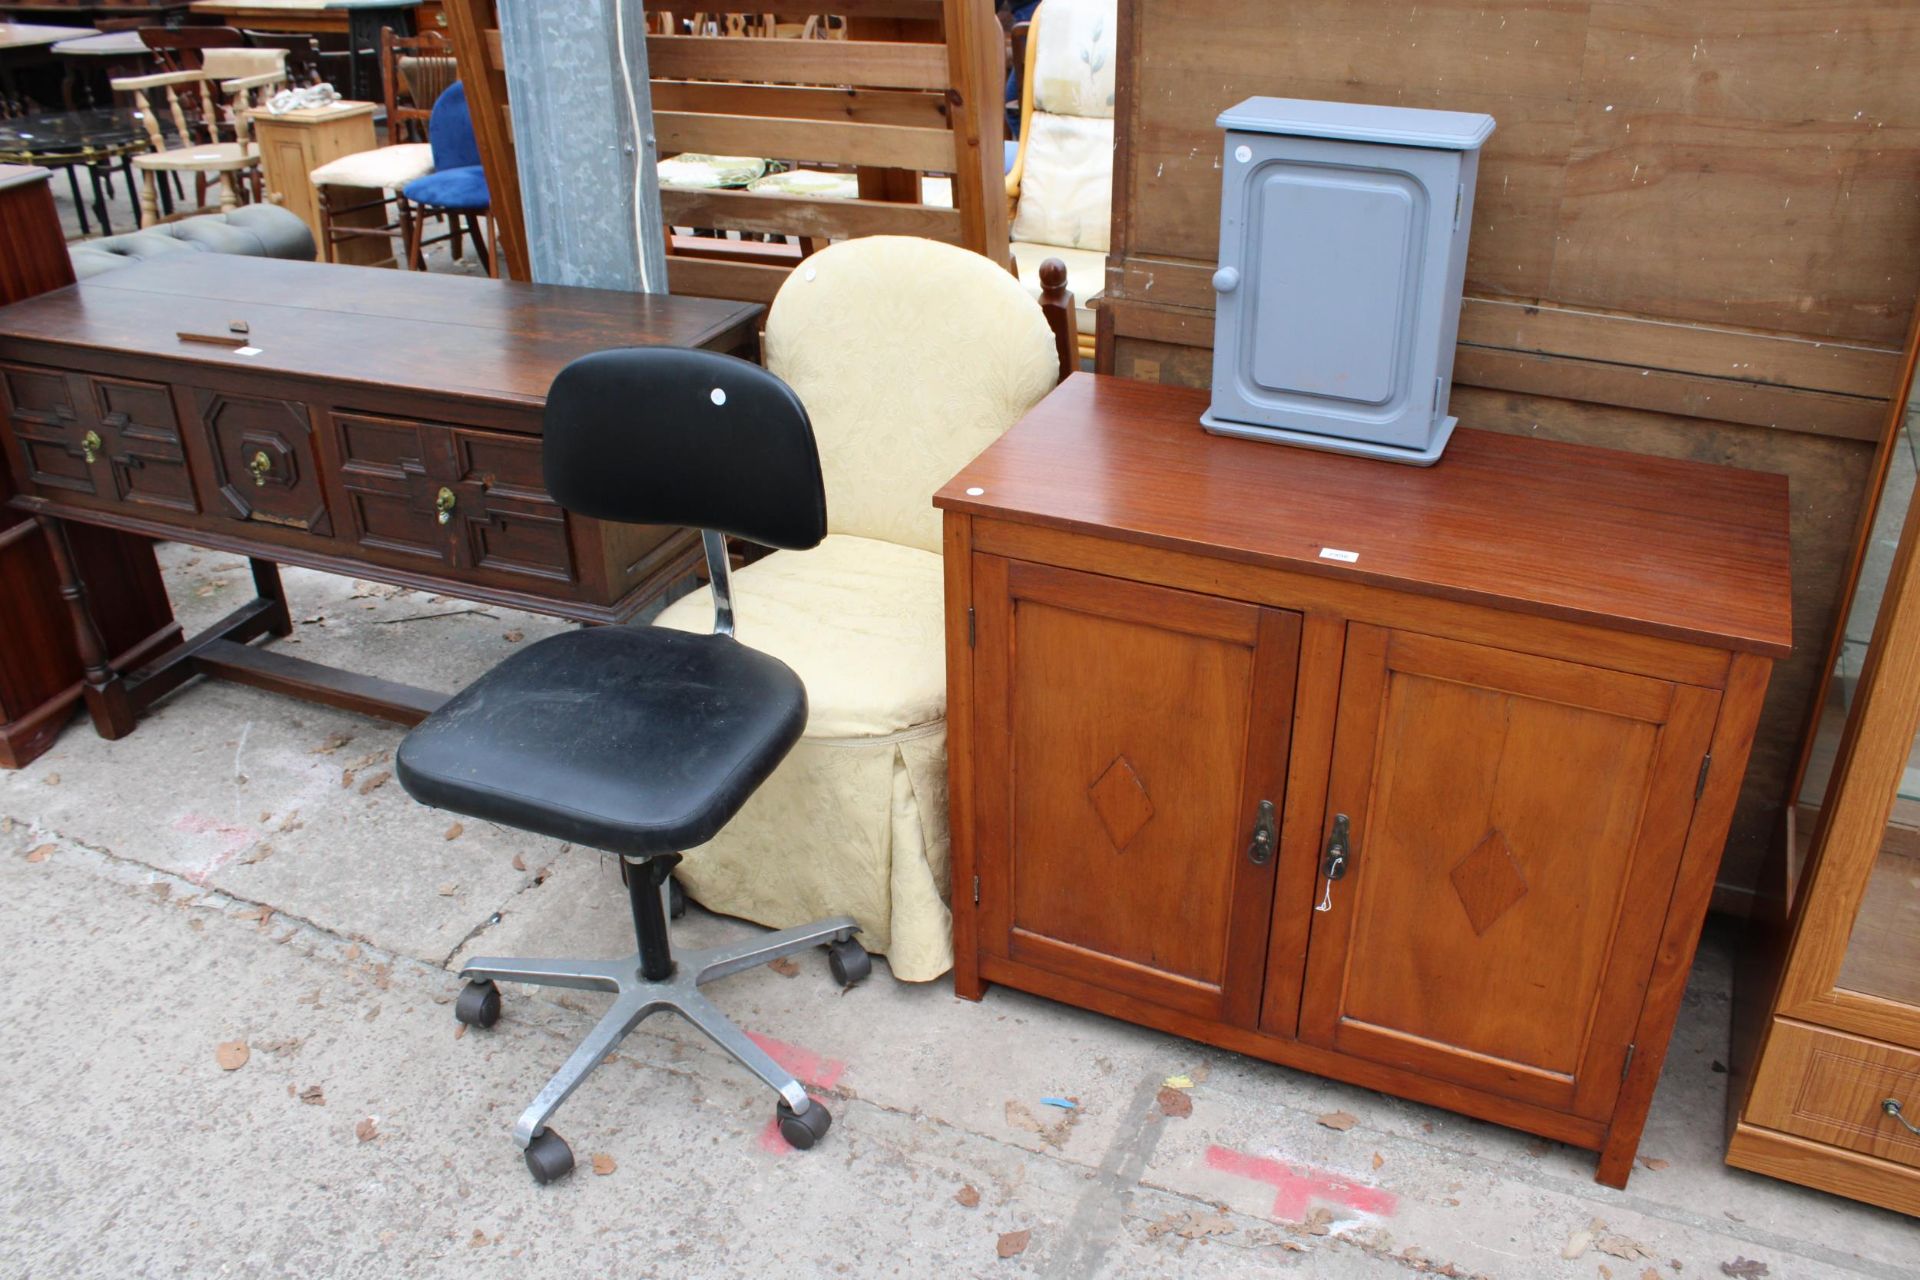 A SMALL PAINTED WALL CABINET, BEDROOM CHAIR, SWIVEL OFFICE CHAIR AND A TEAK TWO DOOR CABINET